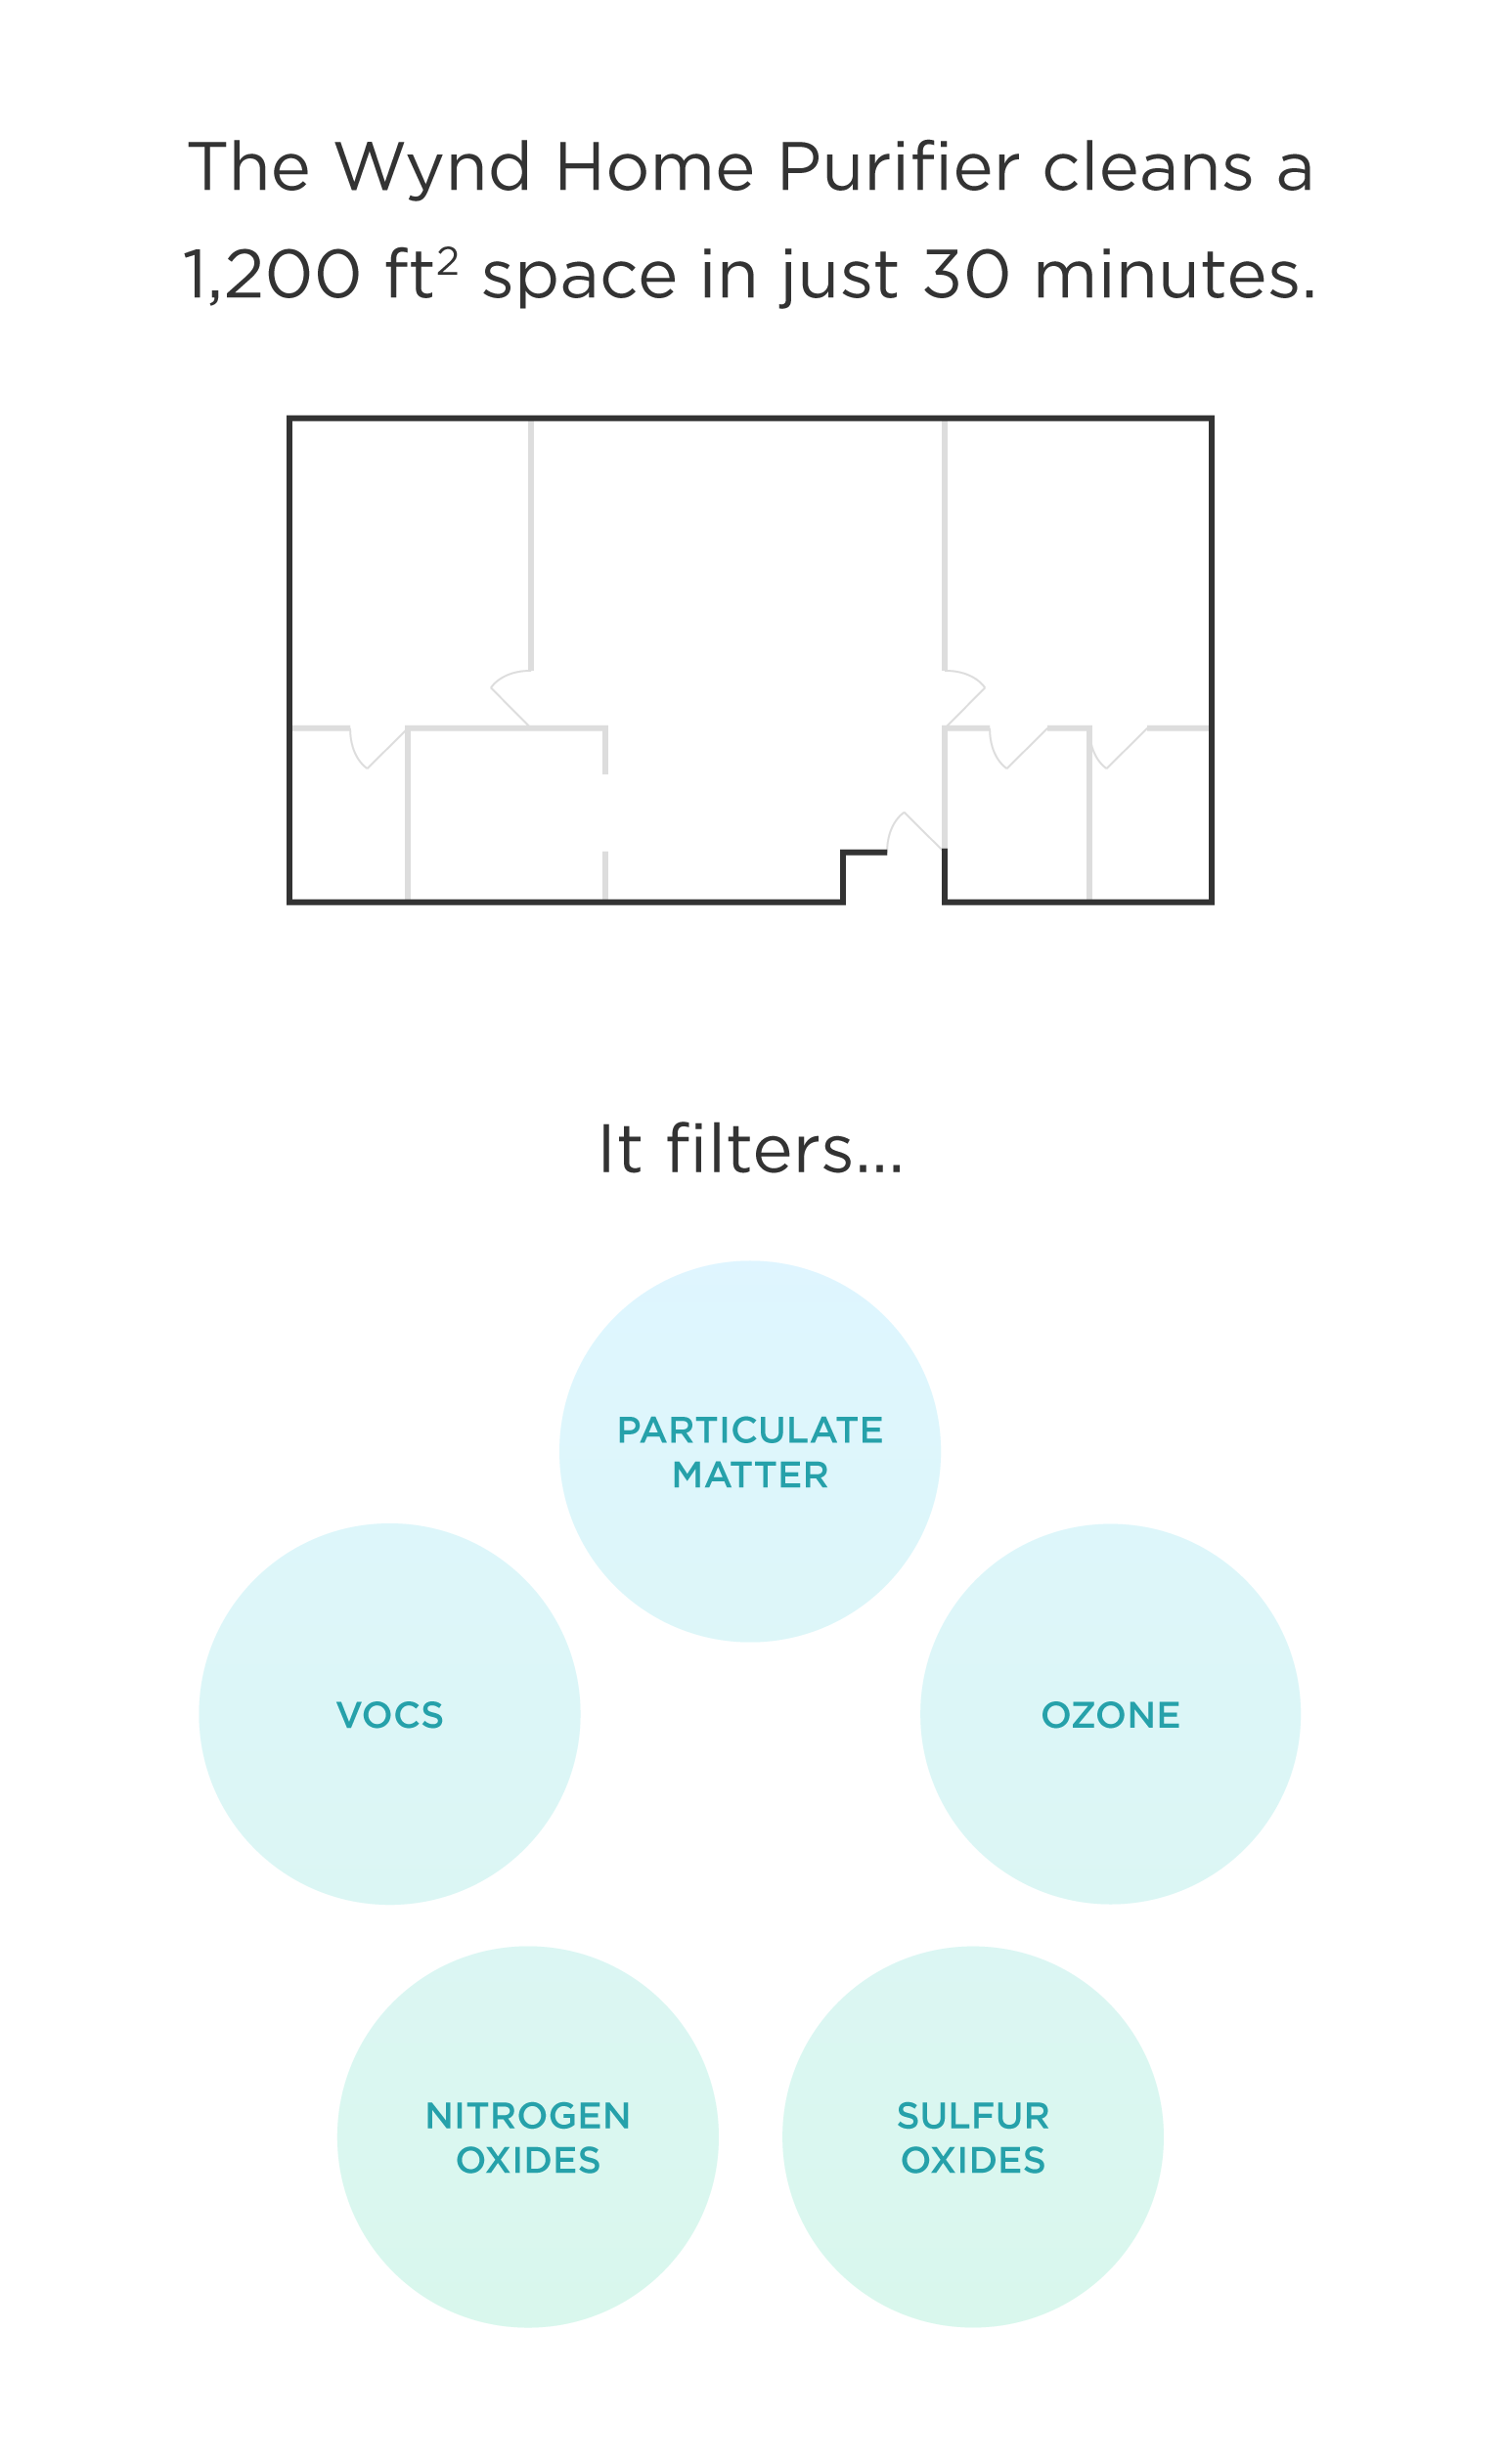 A graphic showing technical features of the Wynd Home Purifier